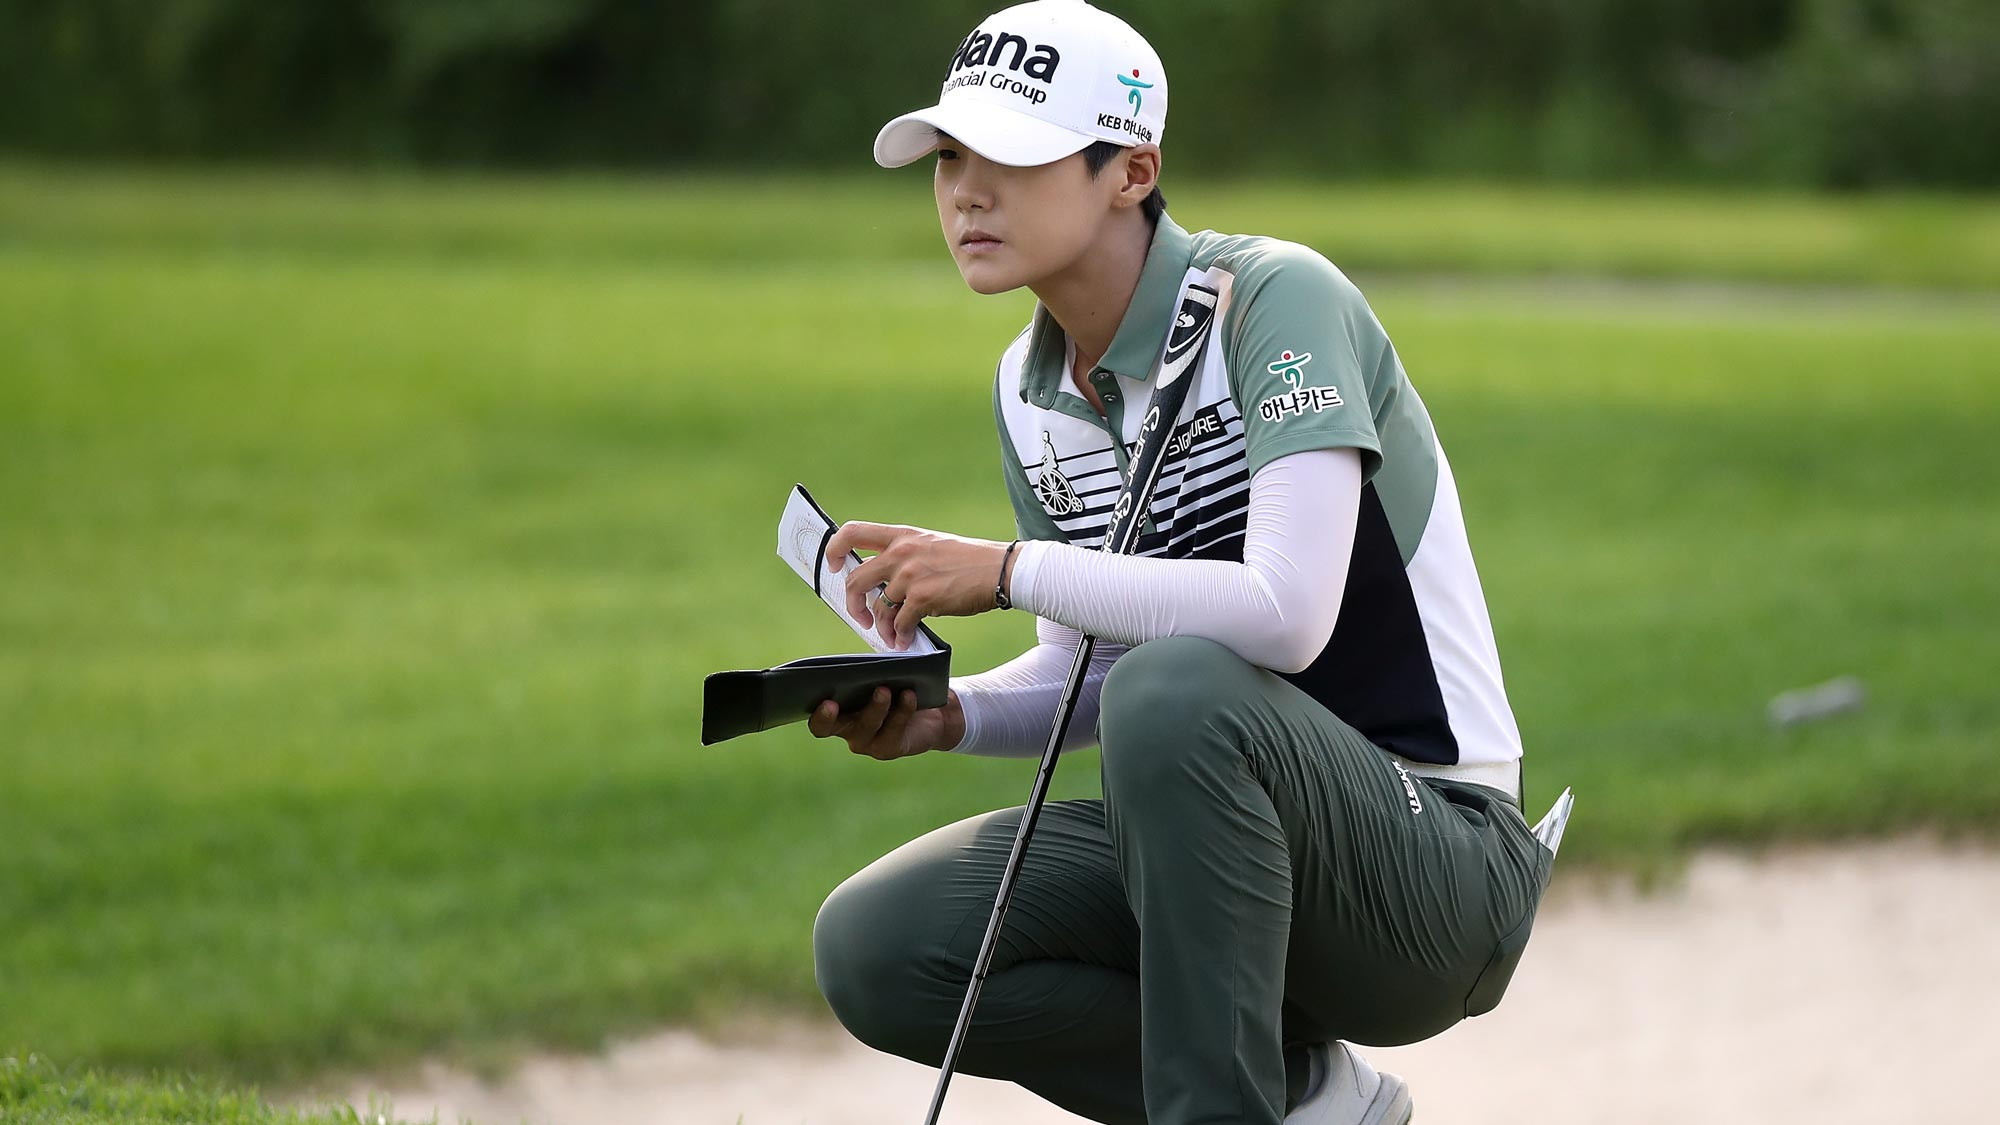 Six-under 66 sees Sung Hyun Park top leaderboard at Women's PGA Championship as injured Beck cards 68